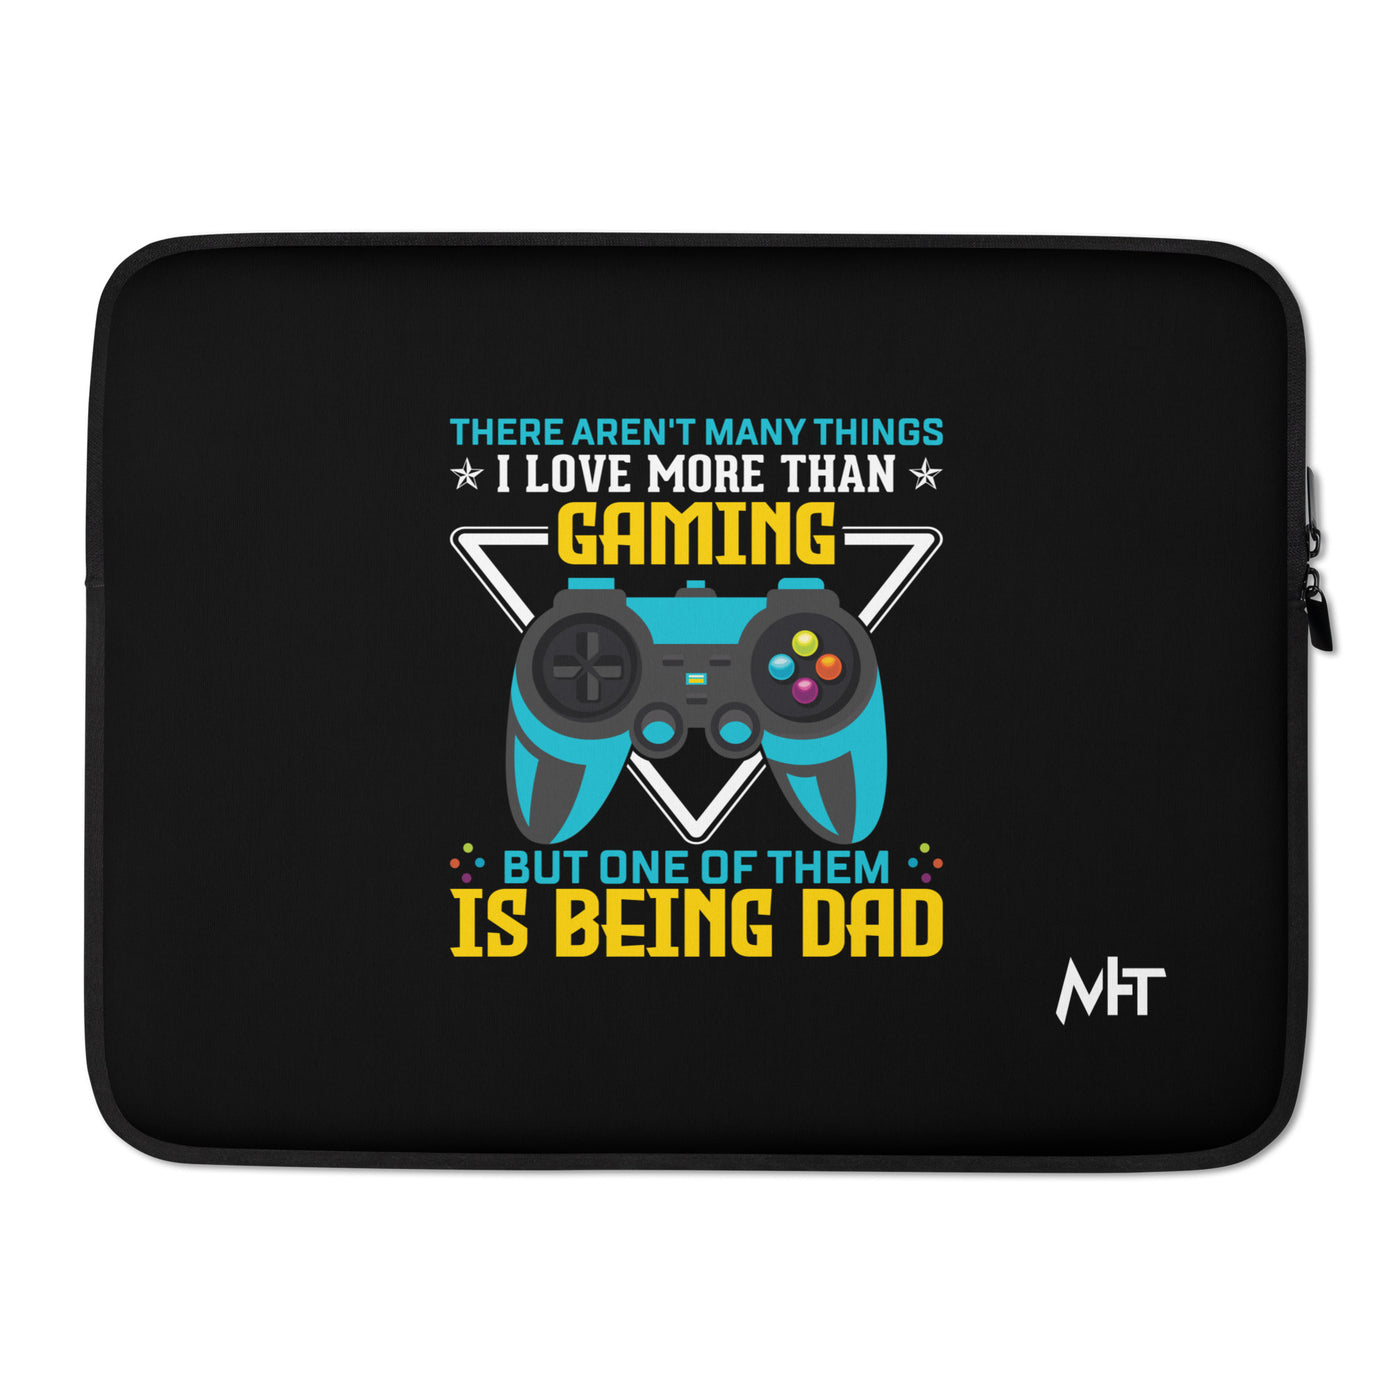 There aren't many things I Love more than Gaming ( rasel ) - Laptop Sleeve